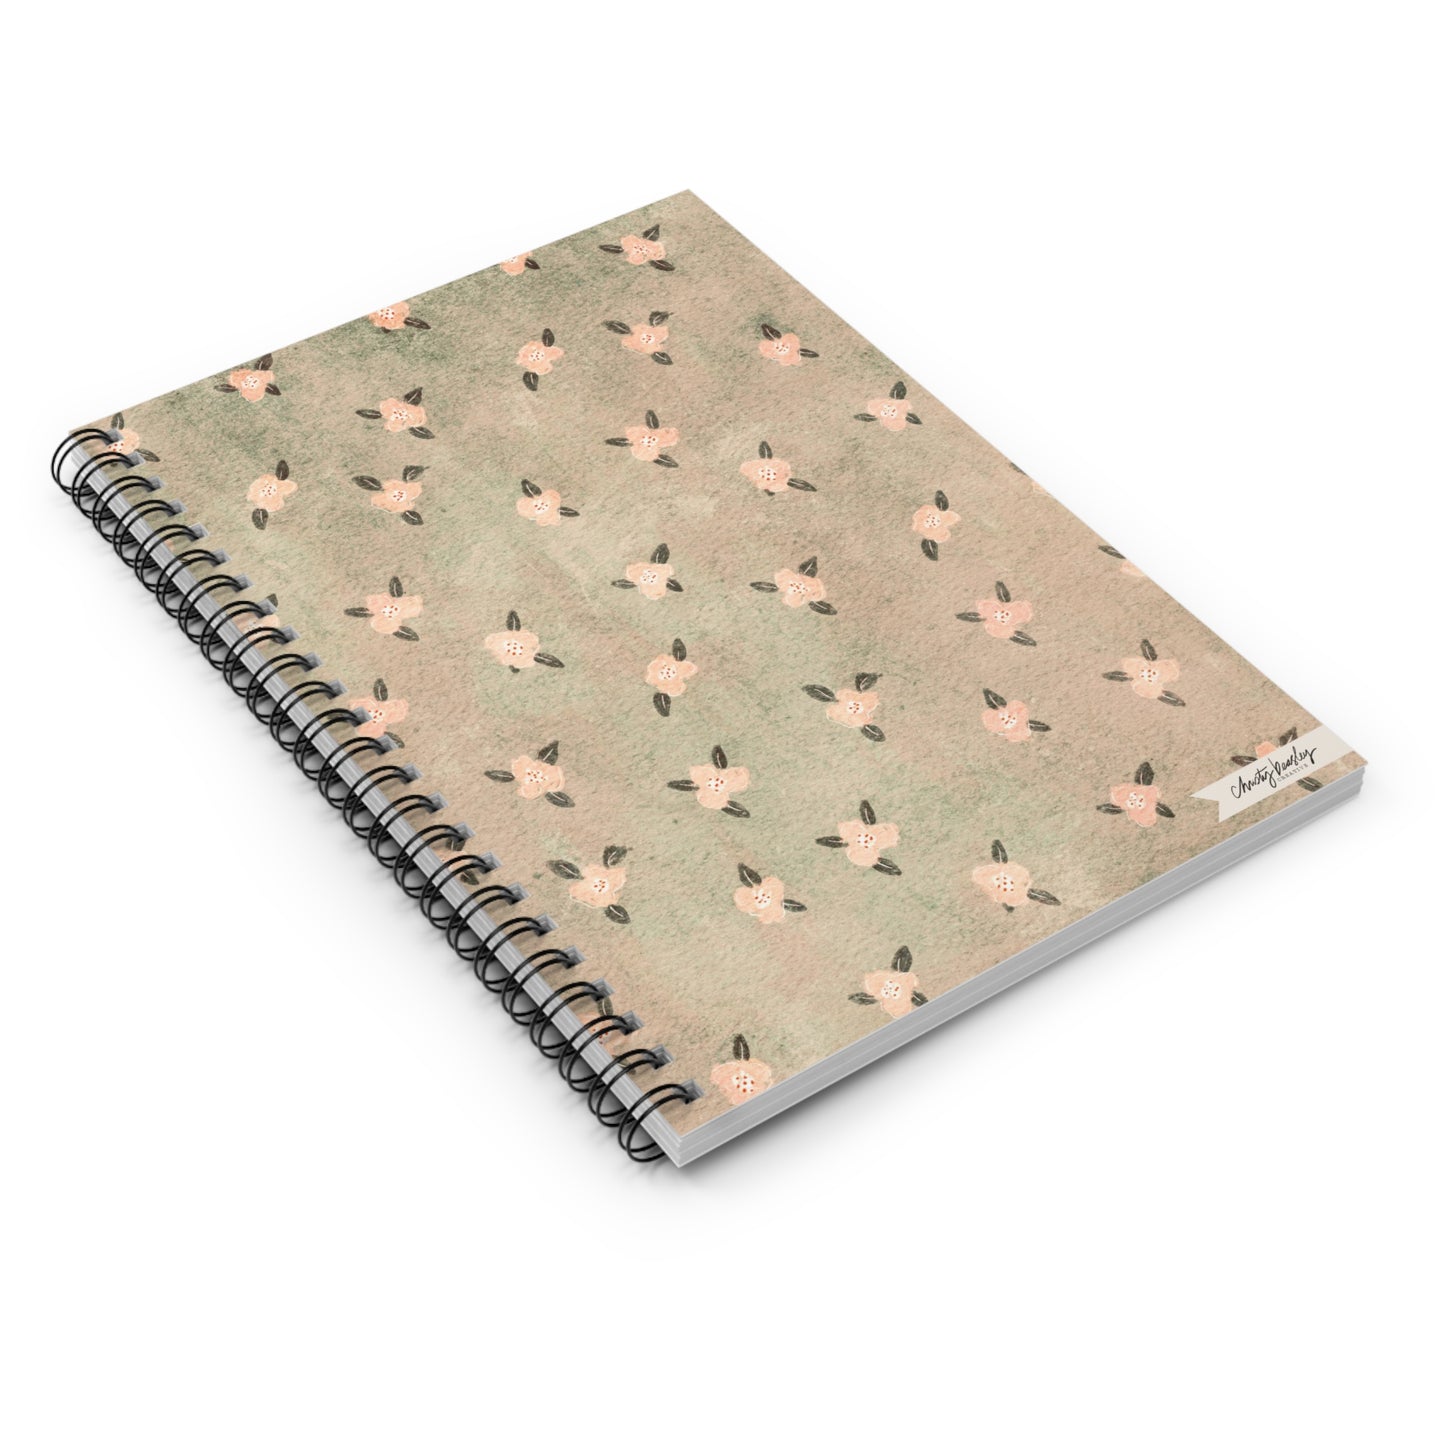 Grungy Pink Floral Spiral Notebook - Ruled Line - by Christy Beasley